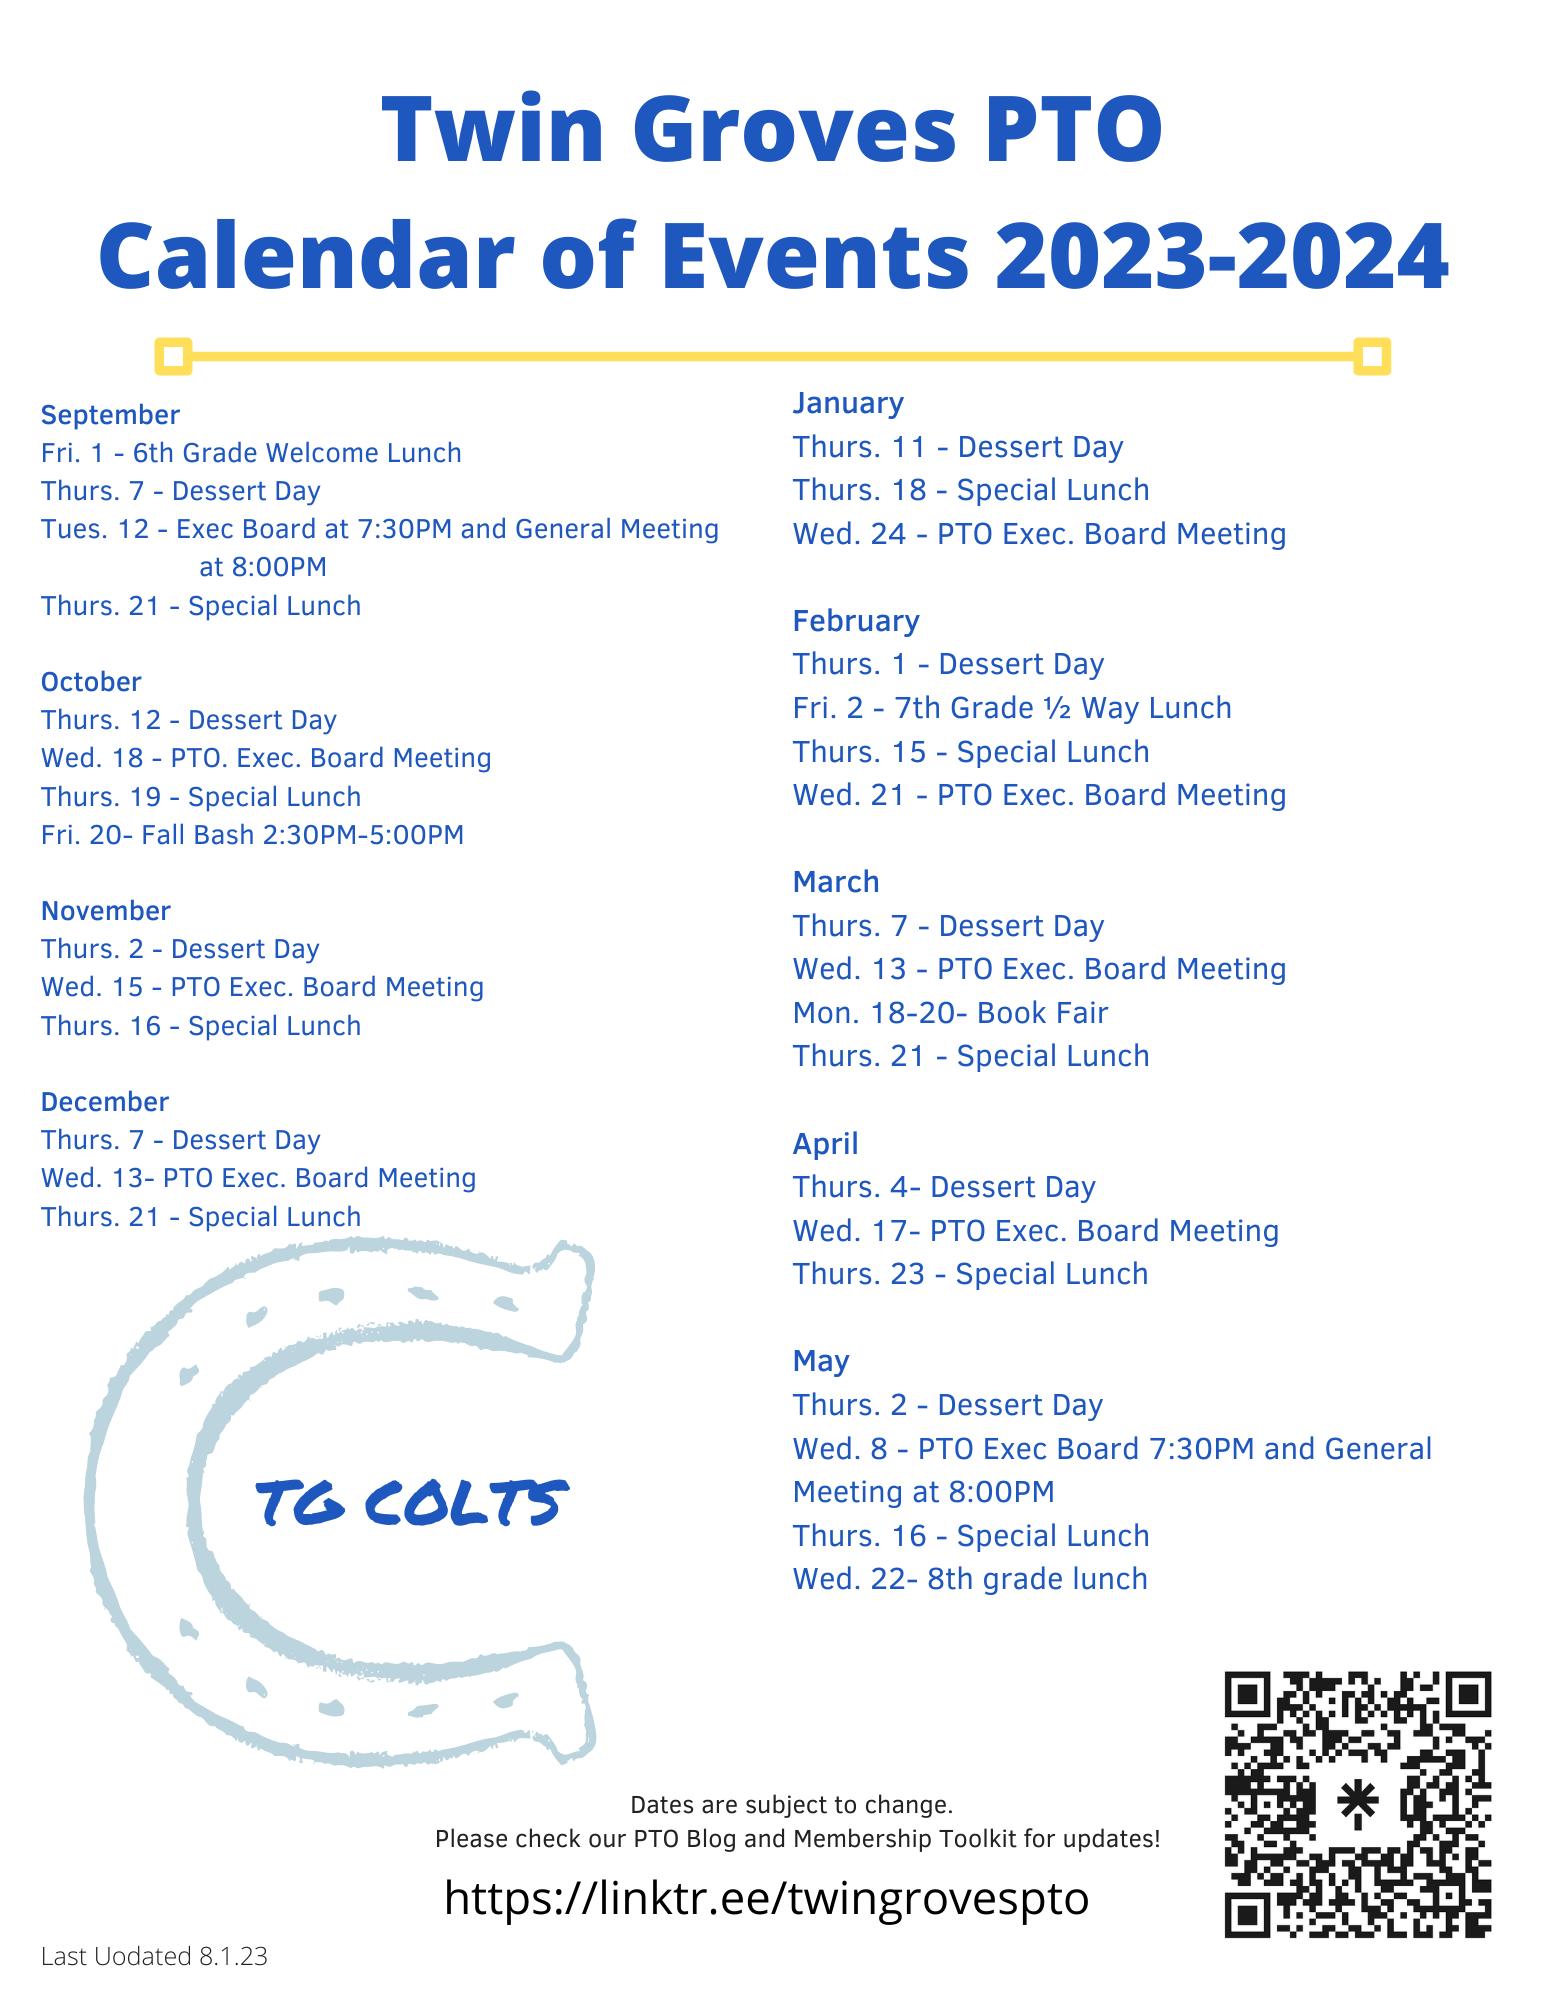 Twin Groves PTO Calendar of Events 2023-24